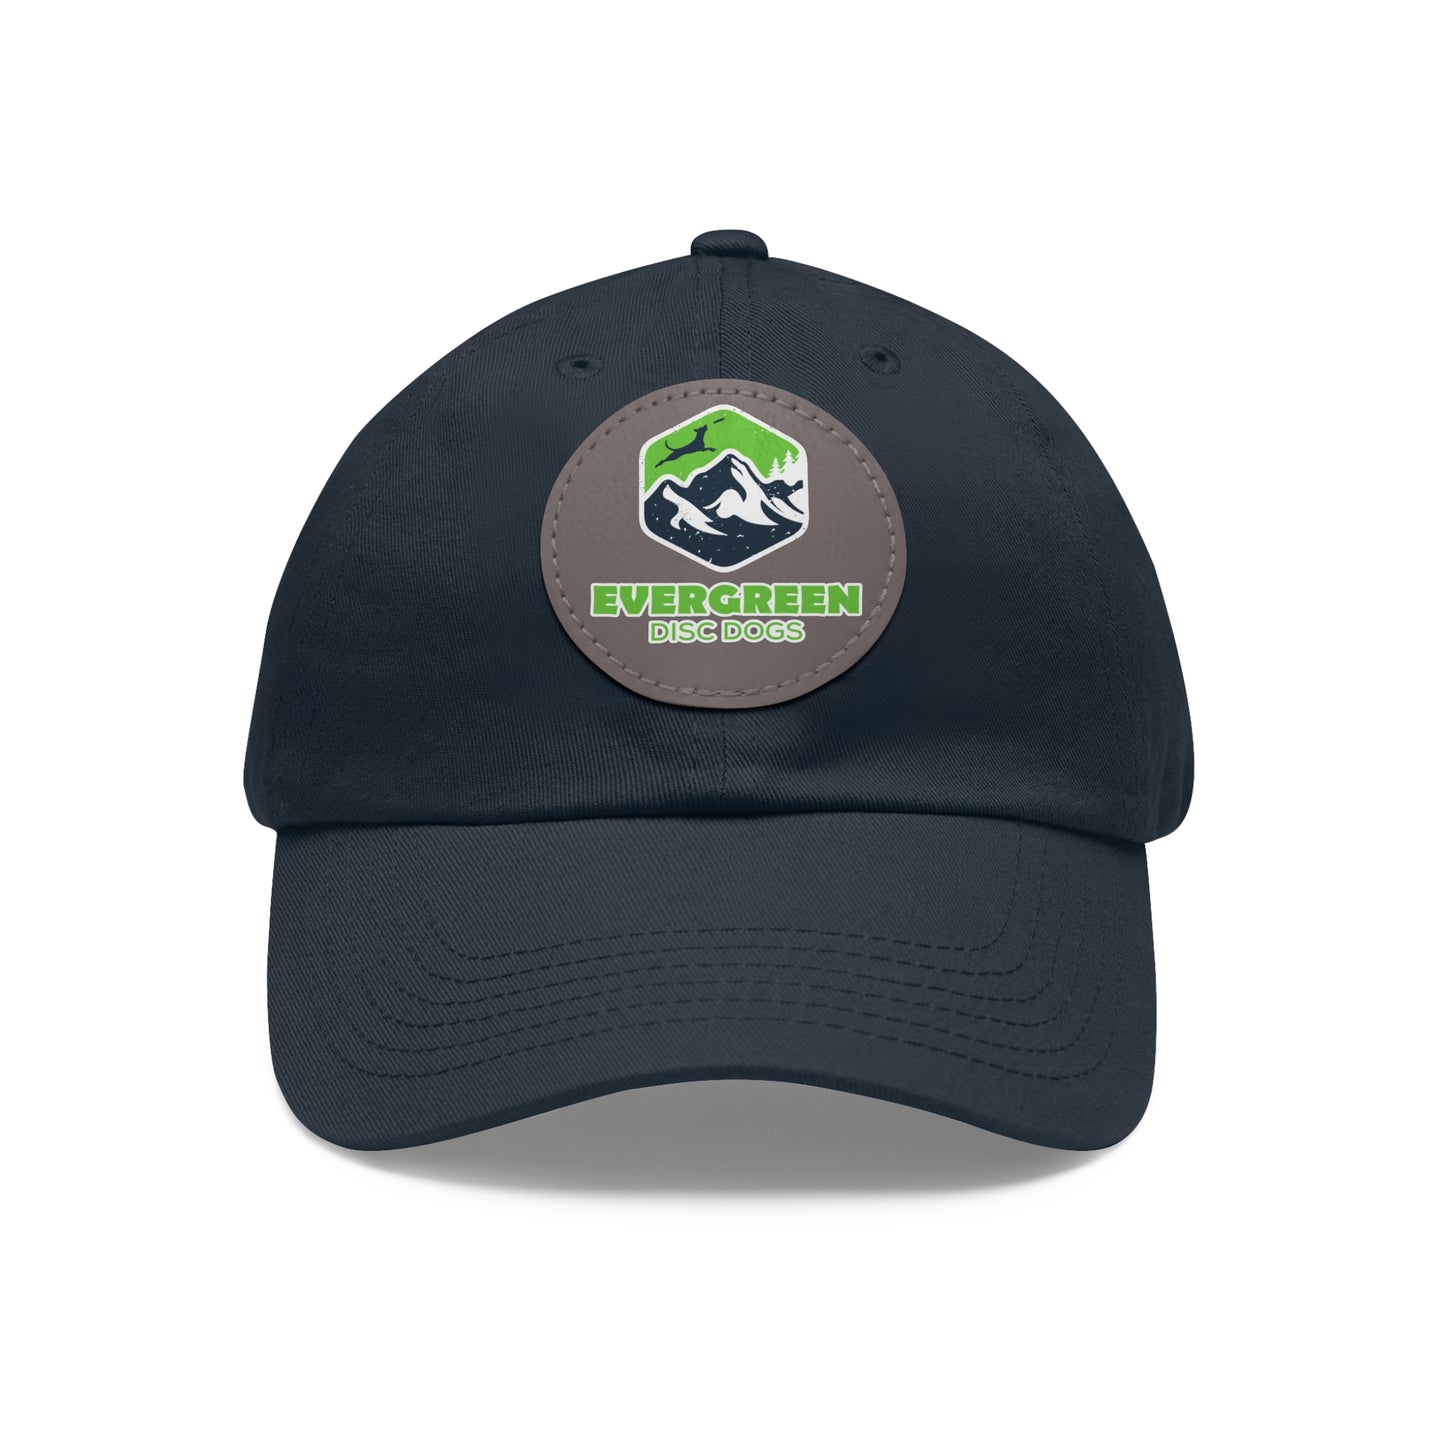 EVERGREEN DISC DOGS Hat with Leather Patch